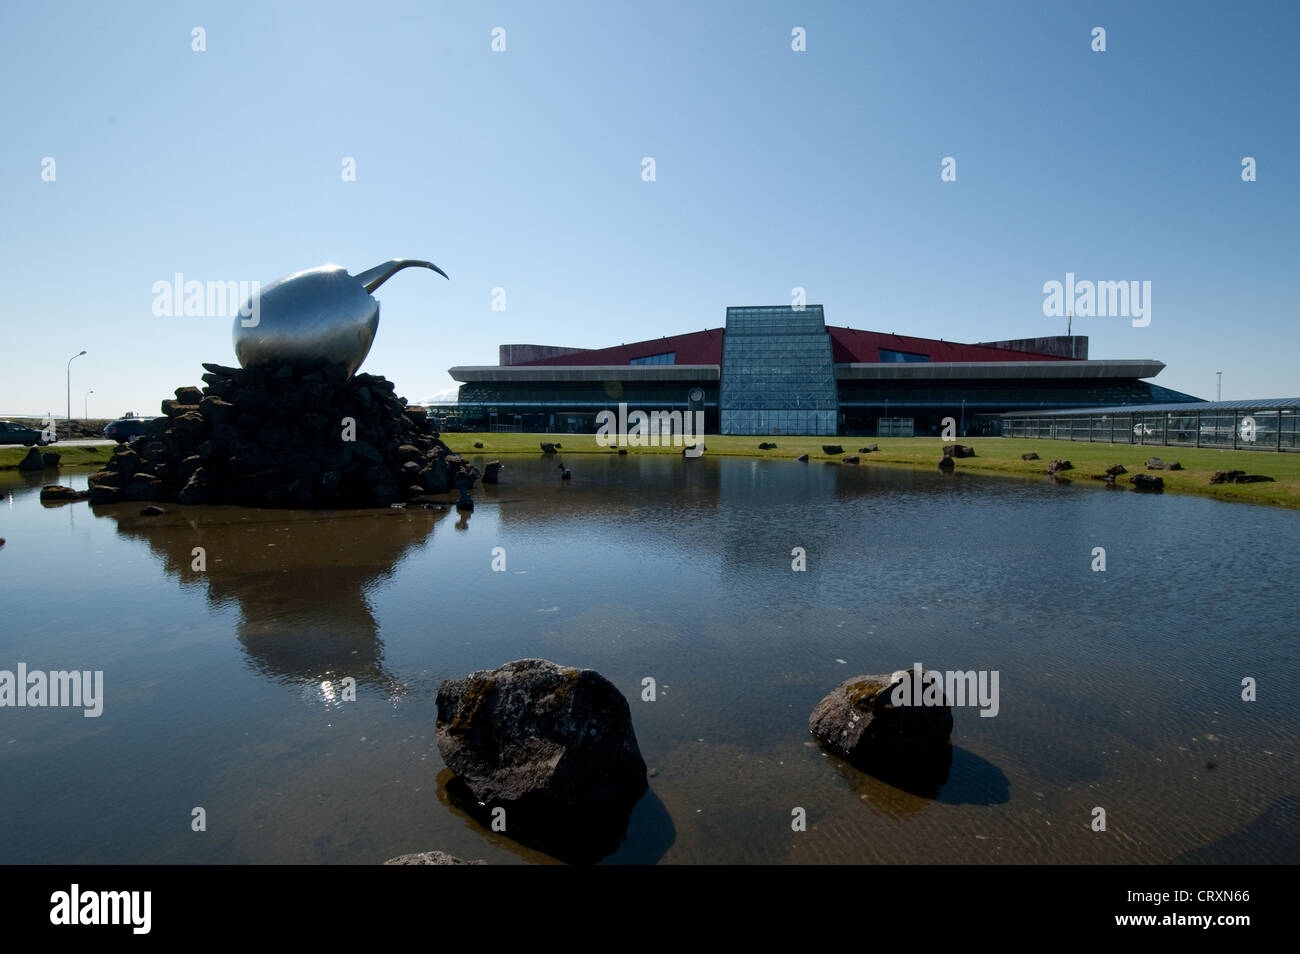 Iceland Reykjavik-Keflavic airport, main building with sculpture The Jet Nest of Magnus Tomasson Stock Photo